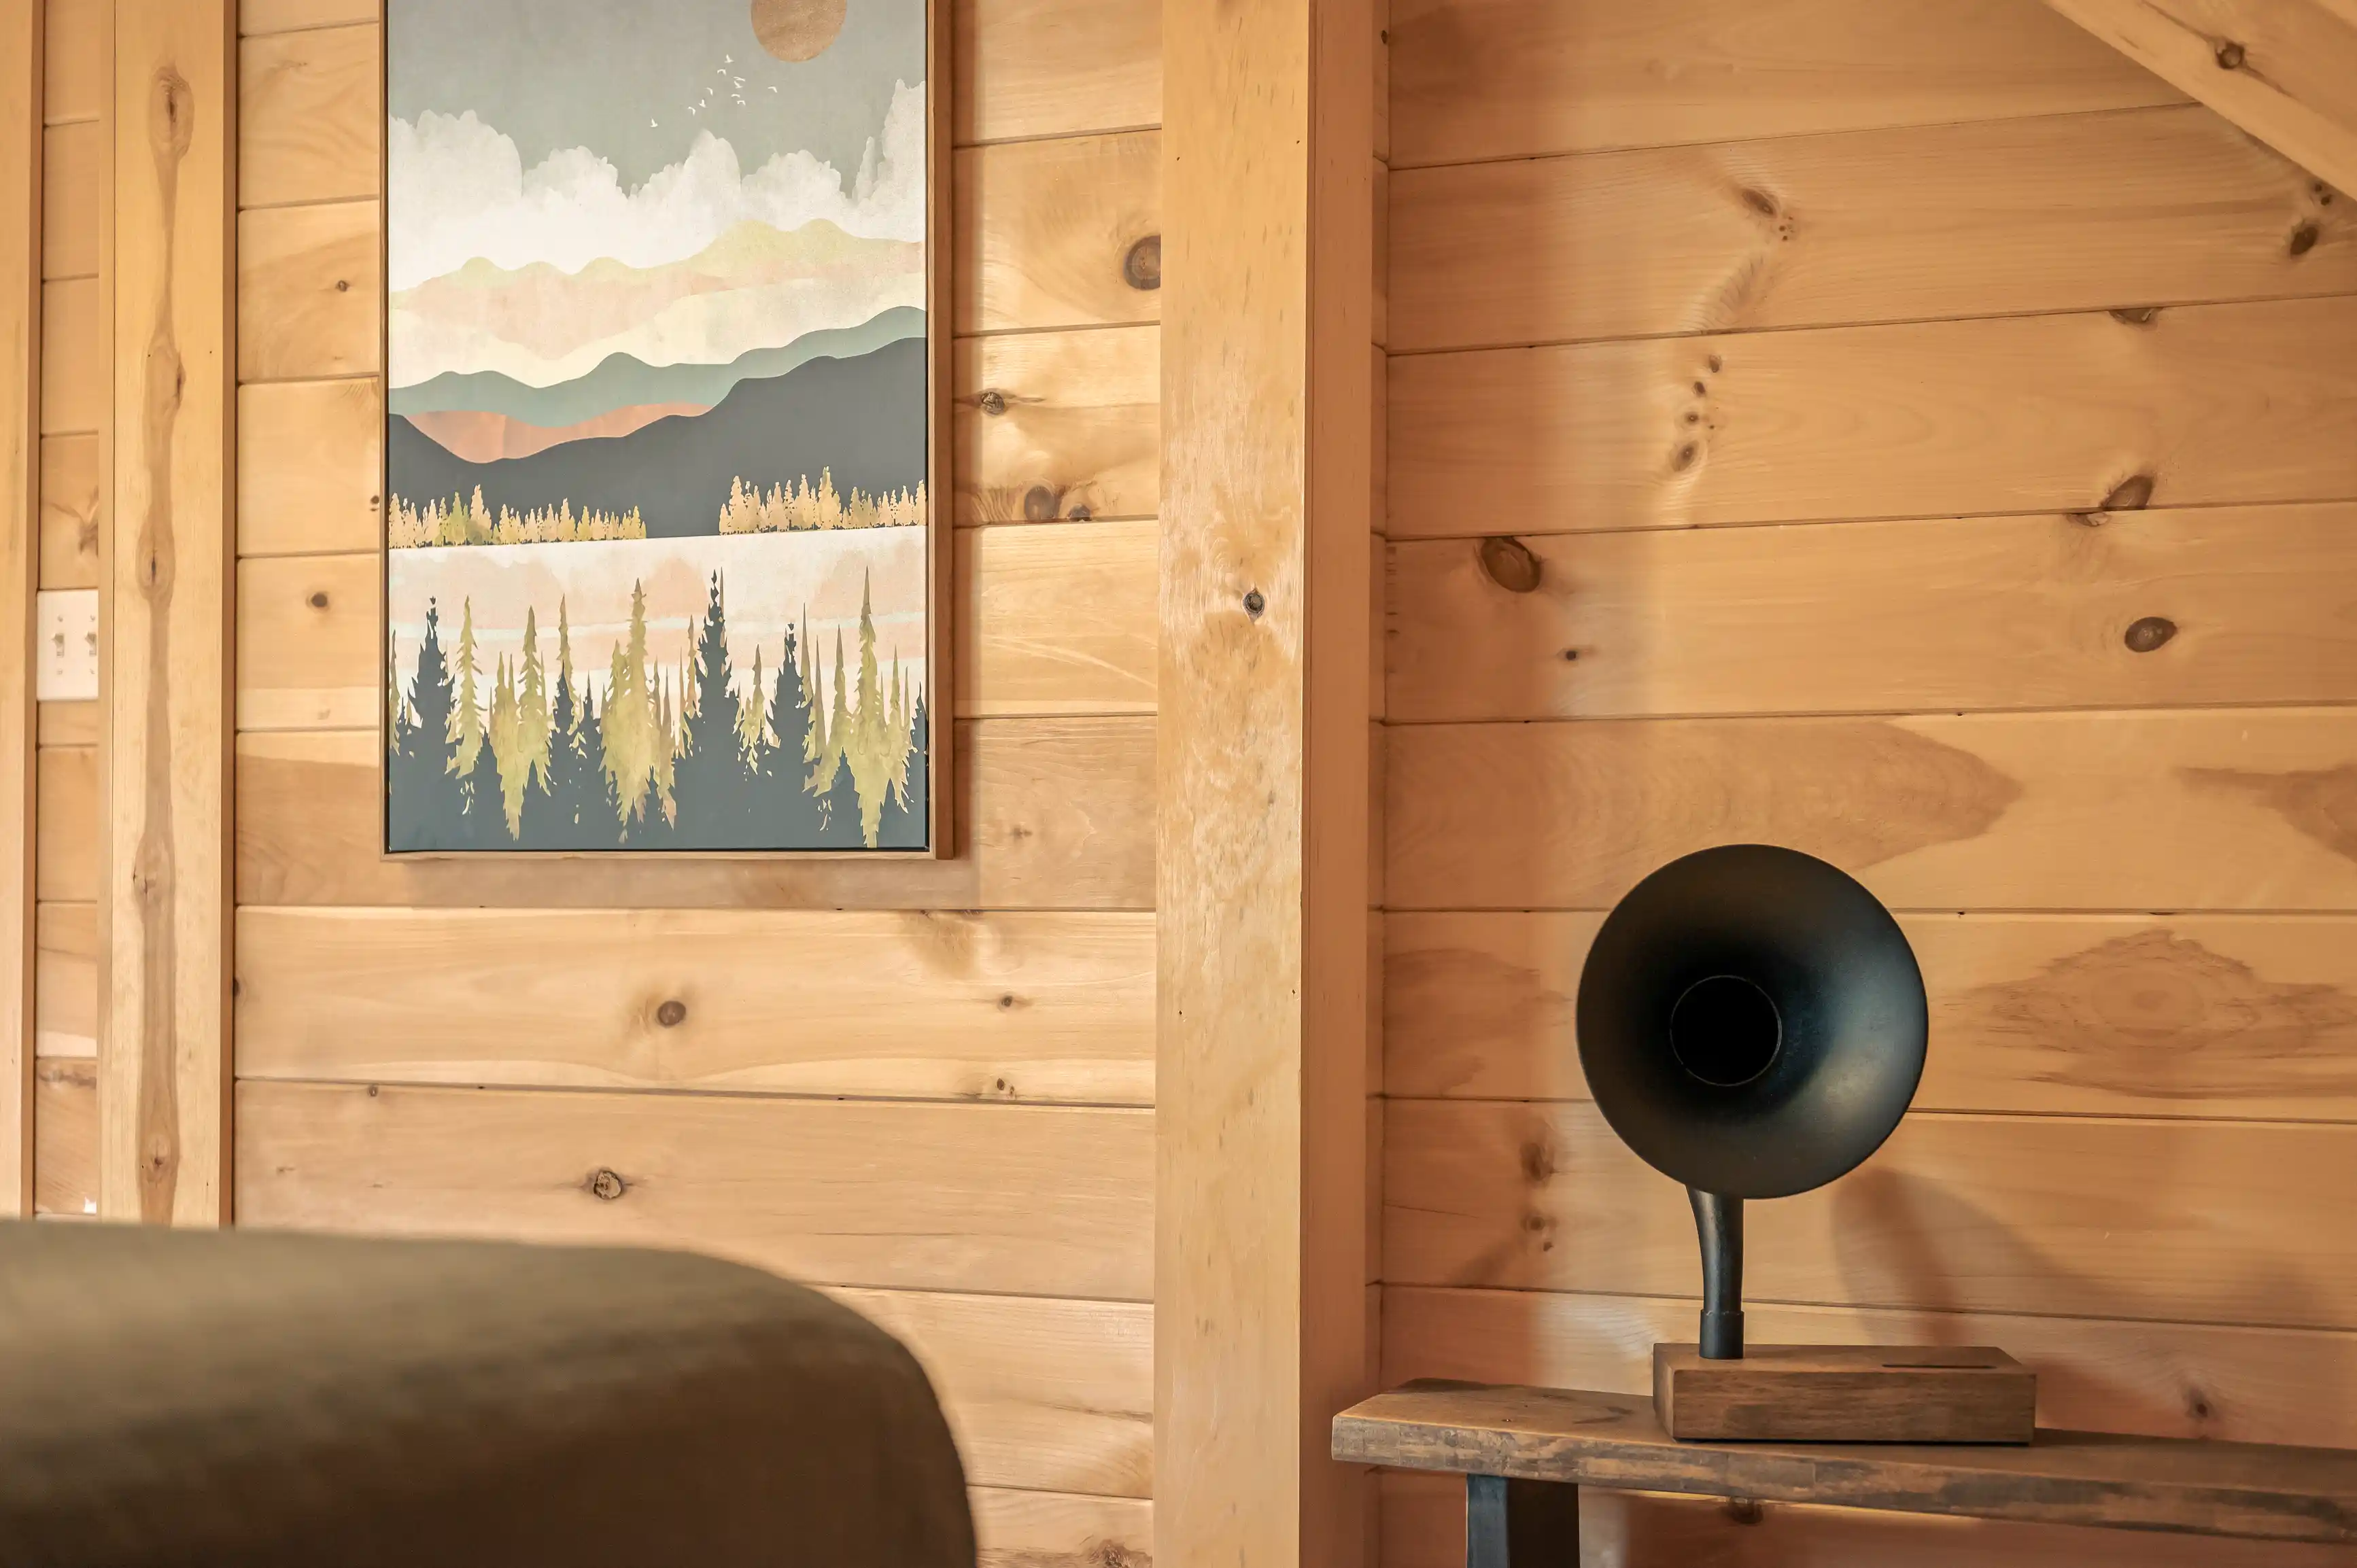 Cozy wooden cabin interior with a framed artistic nature landscape on the wall and a stylish black speaker on a wooden table.